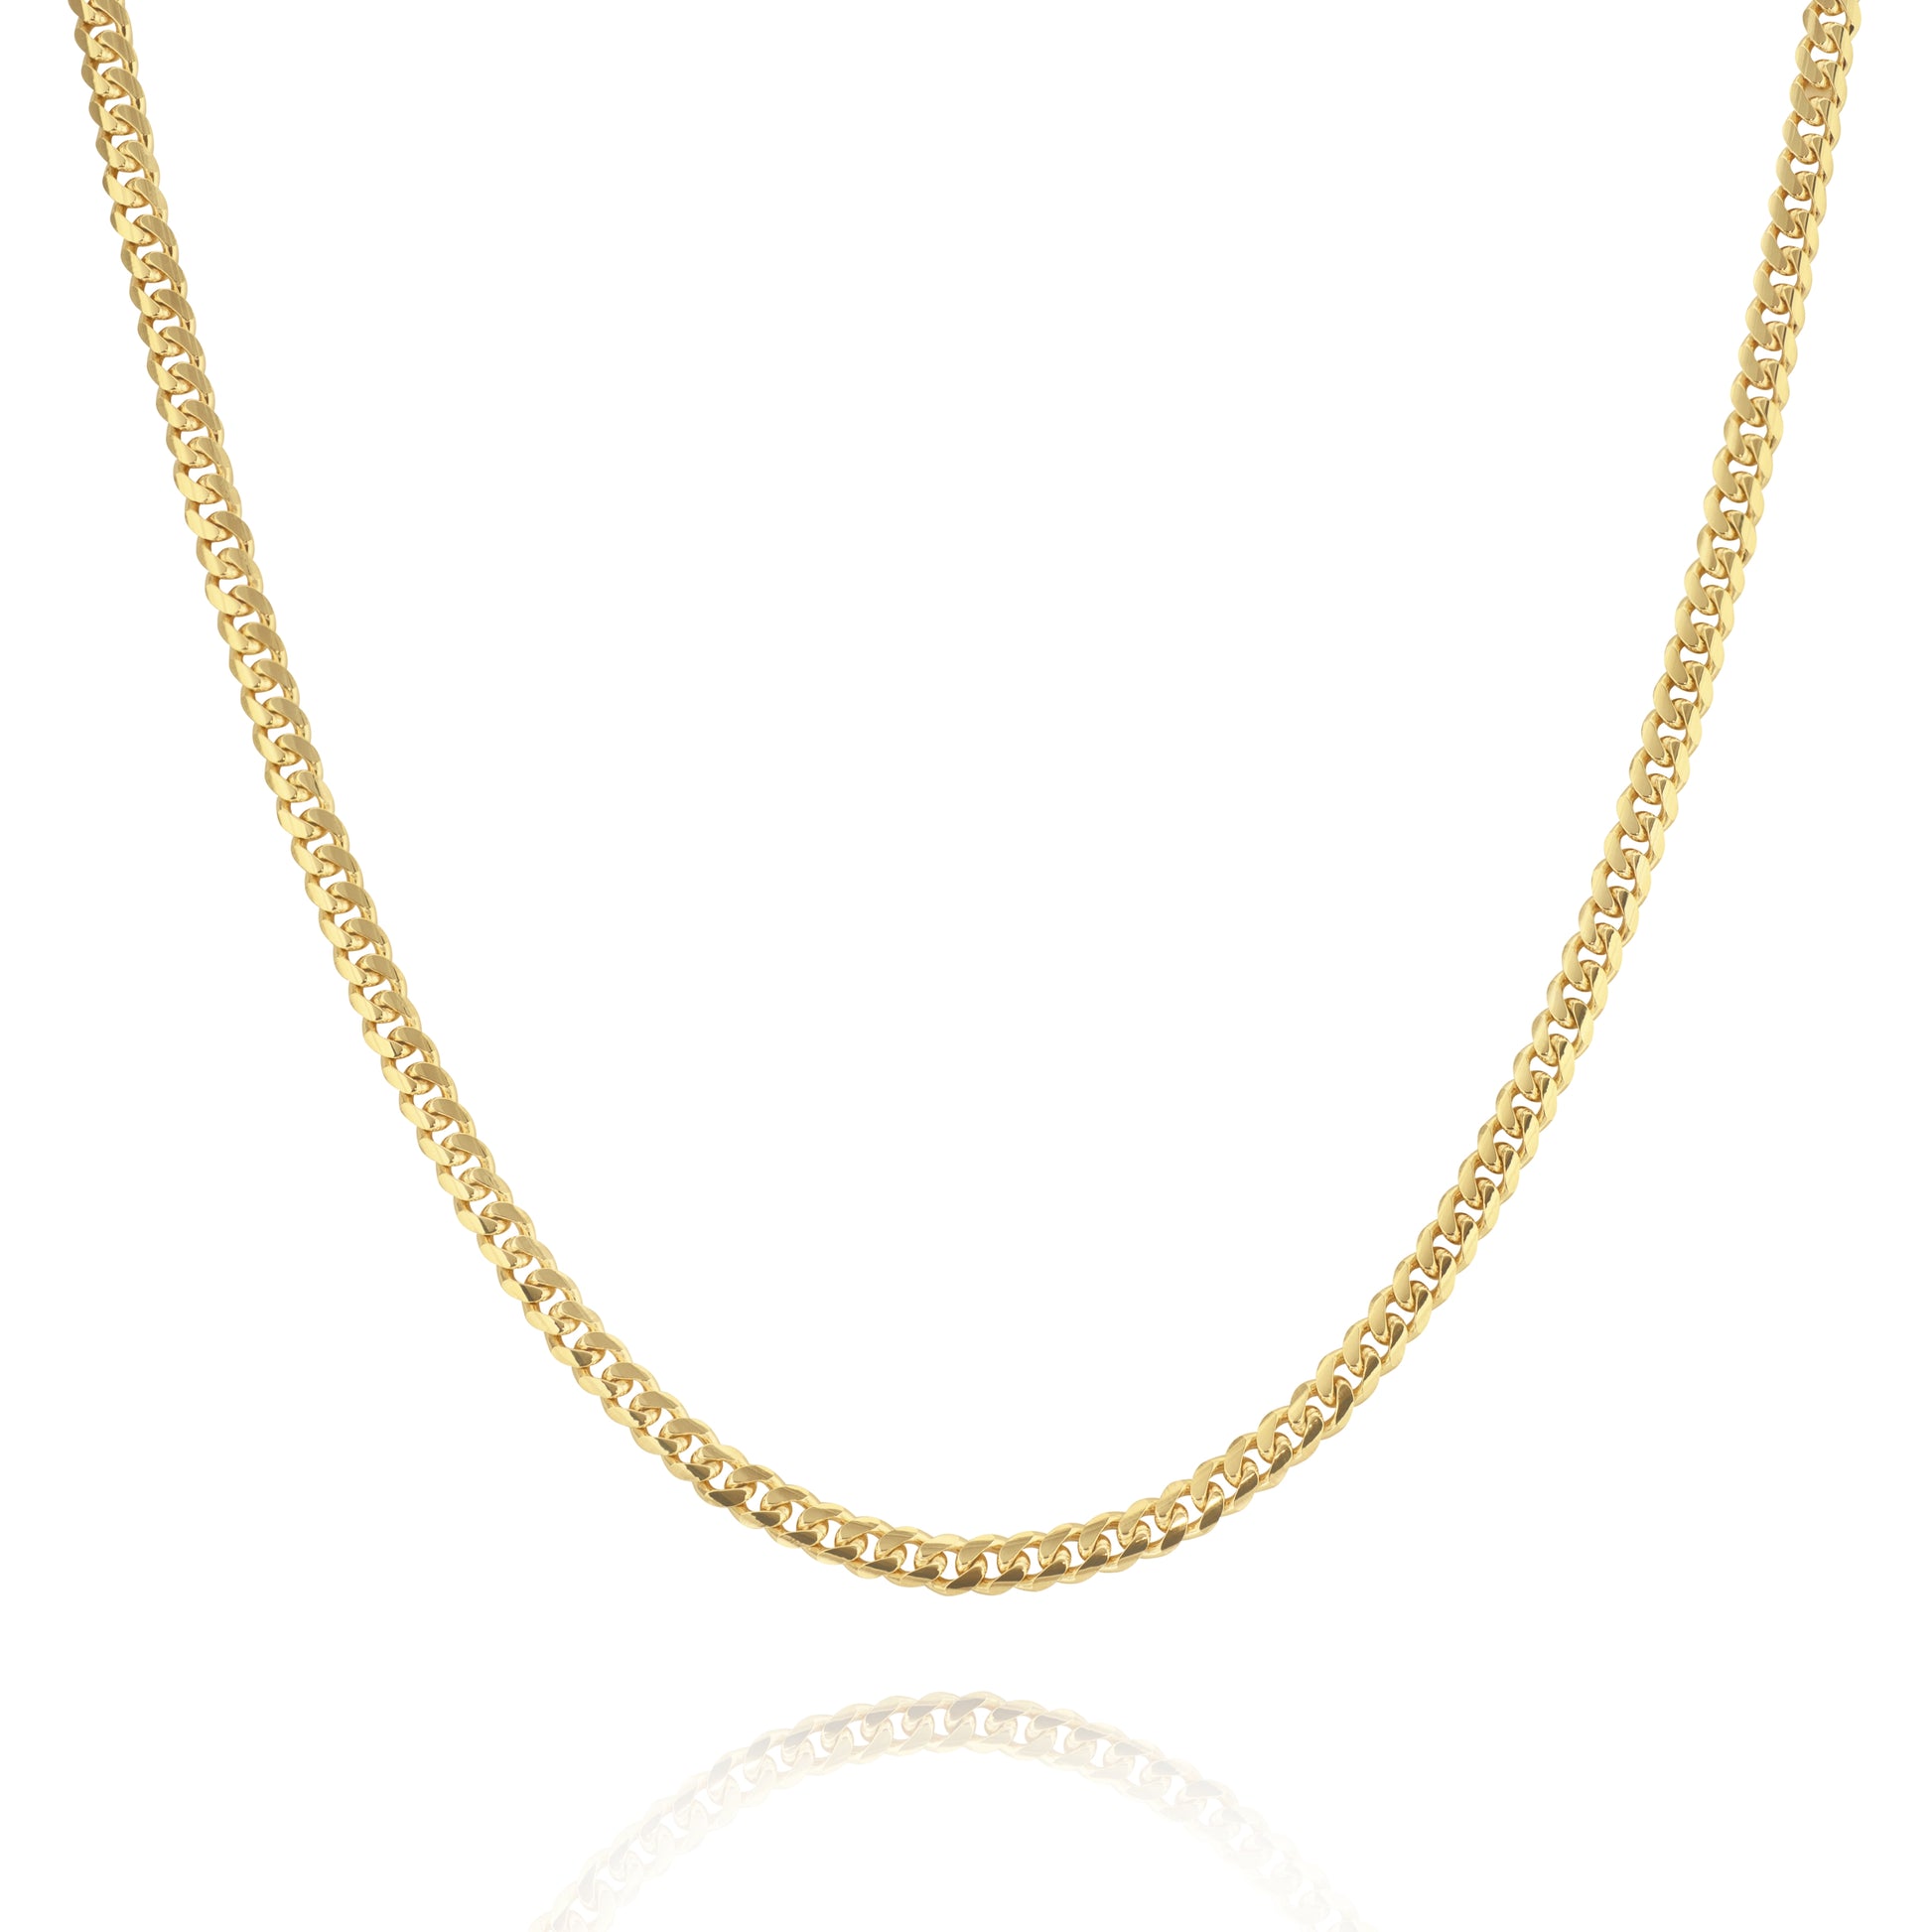 14K Yellow Gold Triple Clasp Cuban Link Chain 5Mm 24In 33.8Dwt / 52.6 G